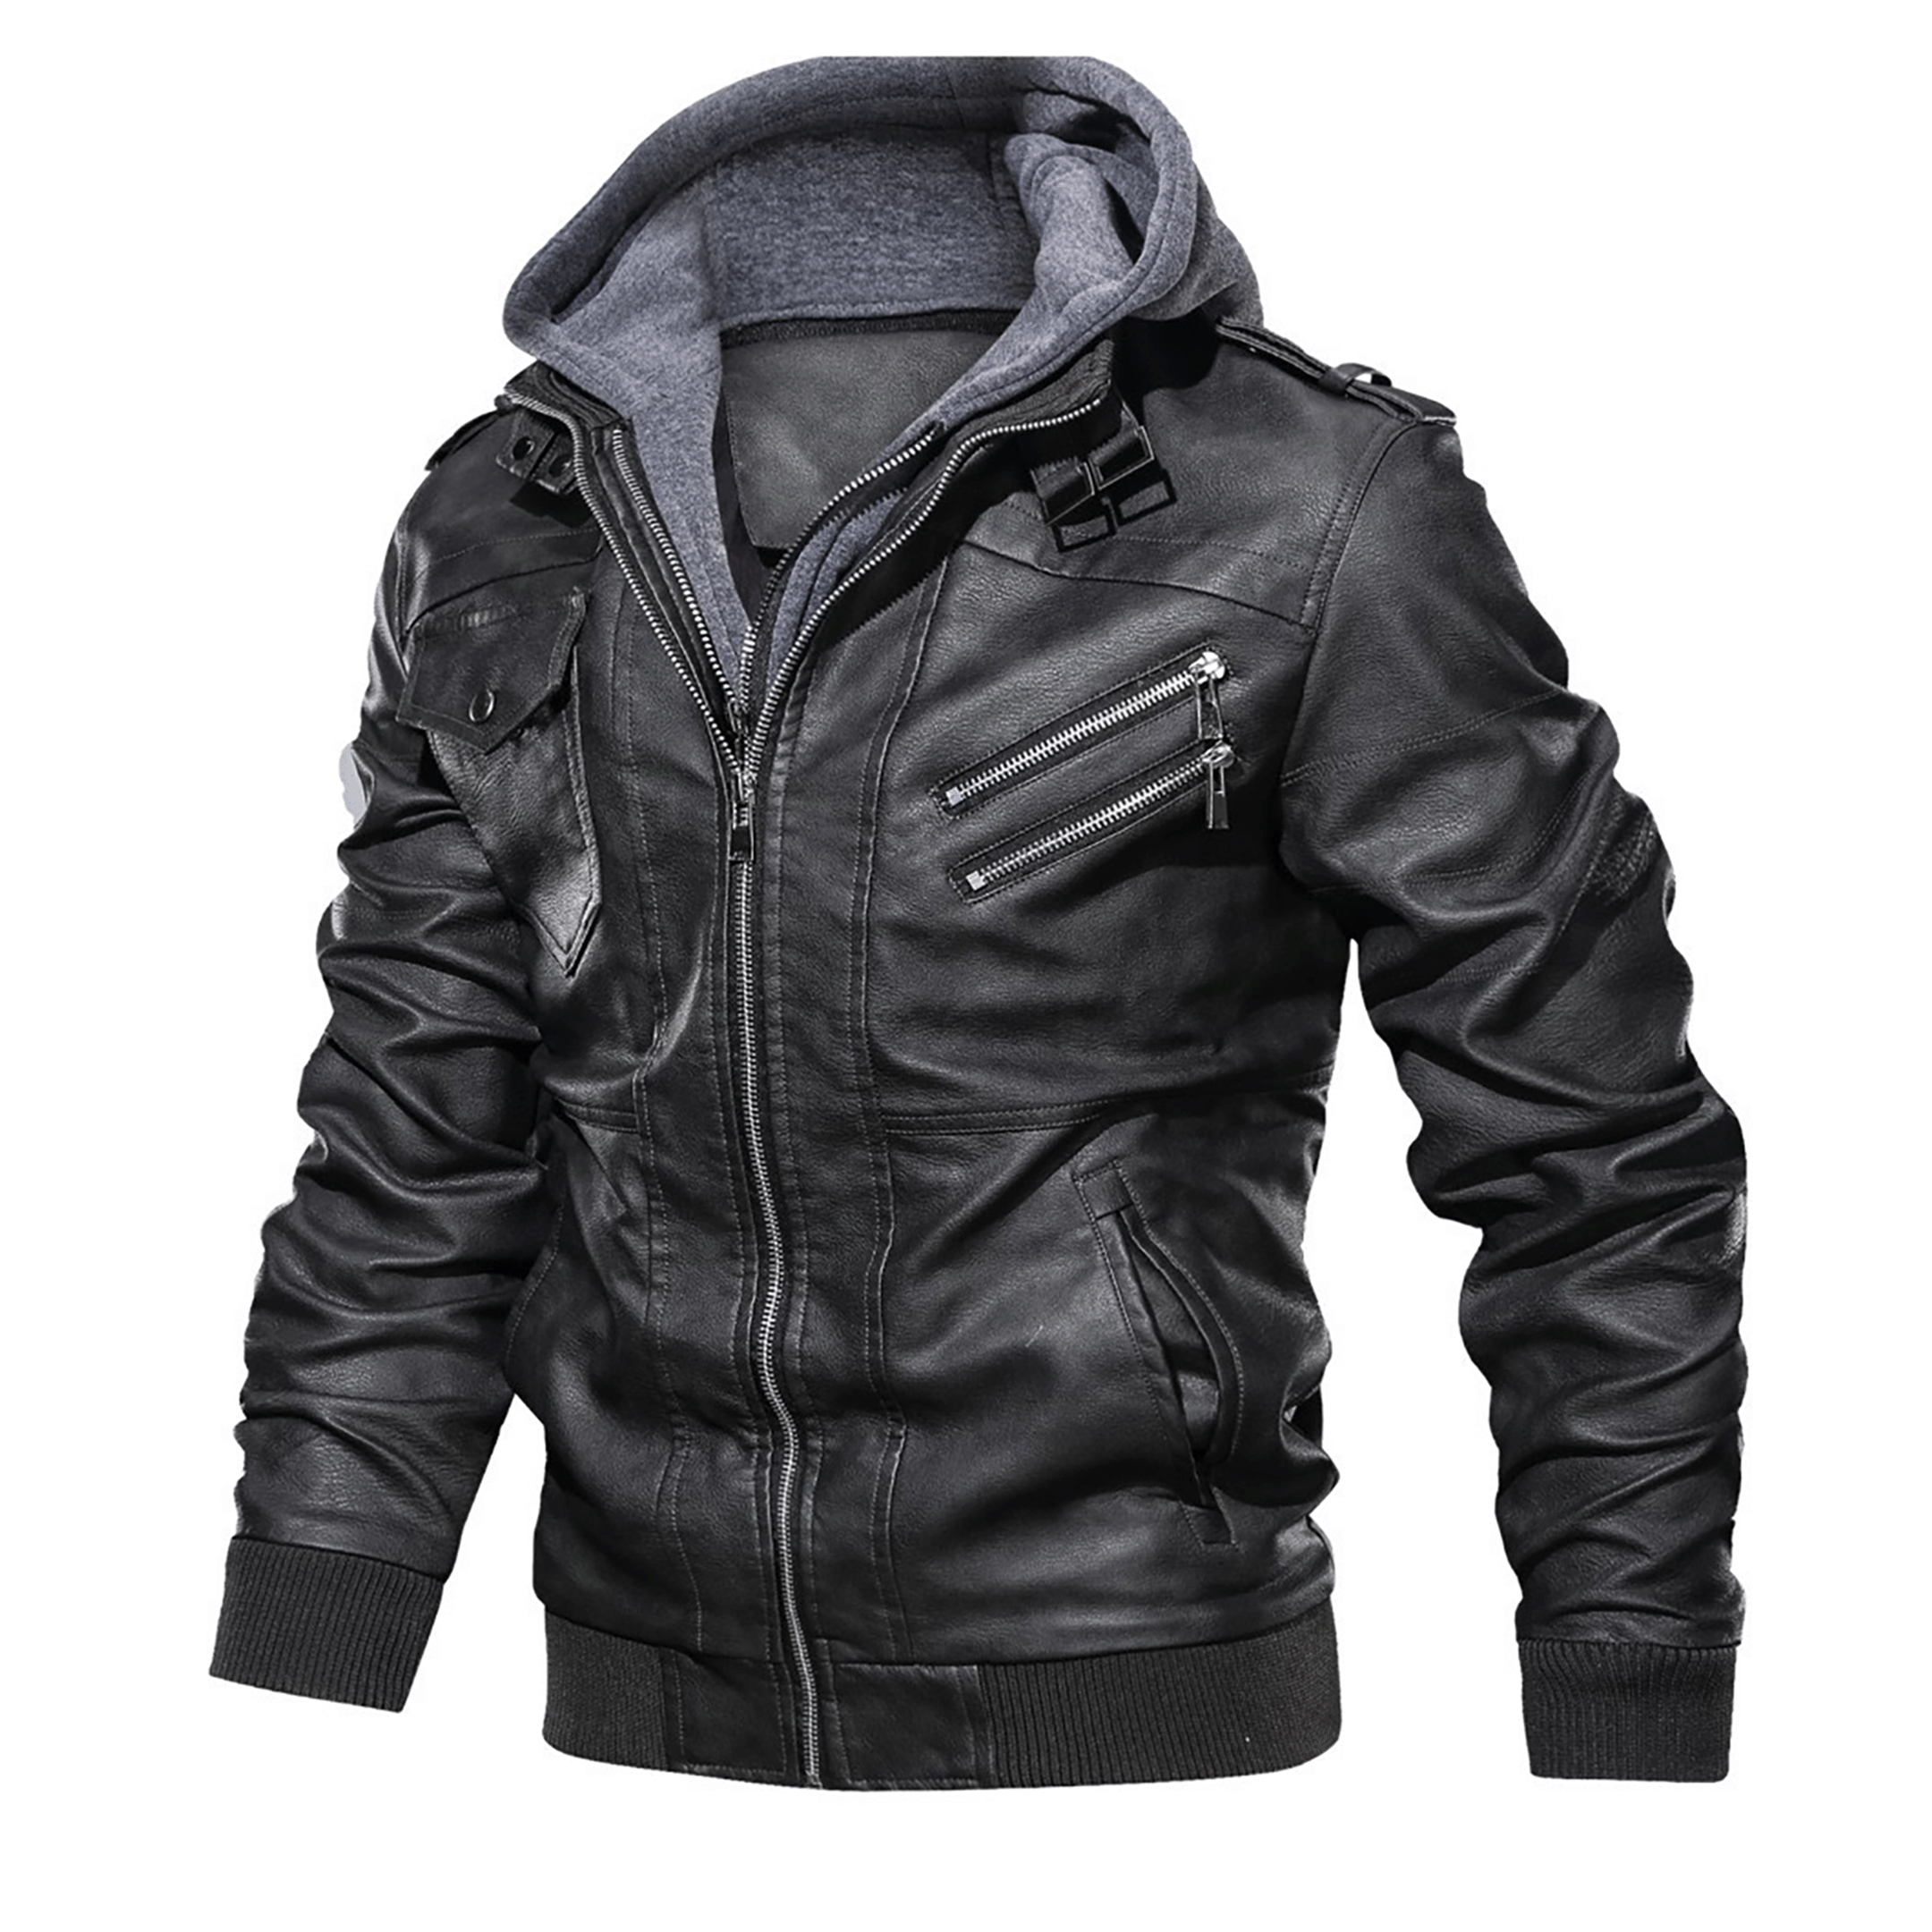 Top leather jackets and latest products 415